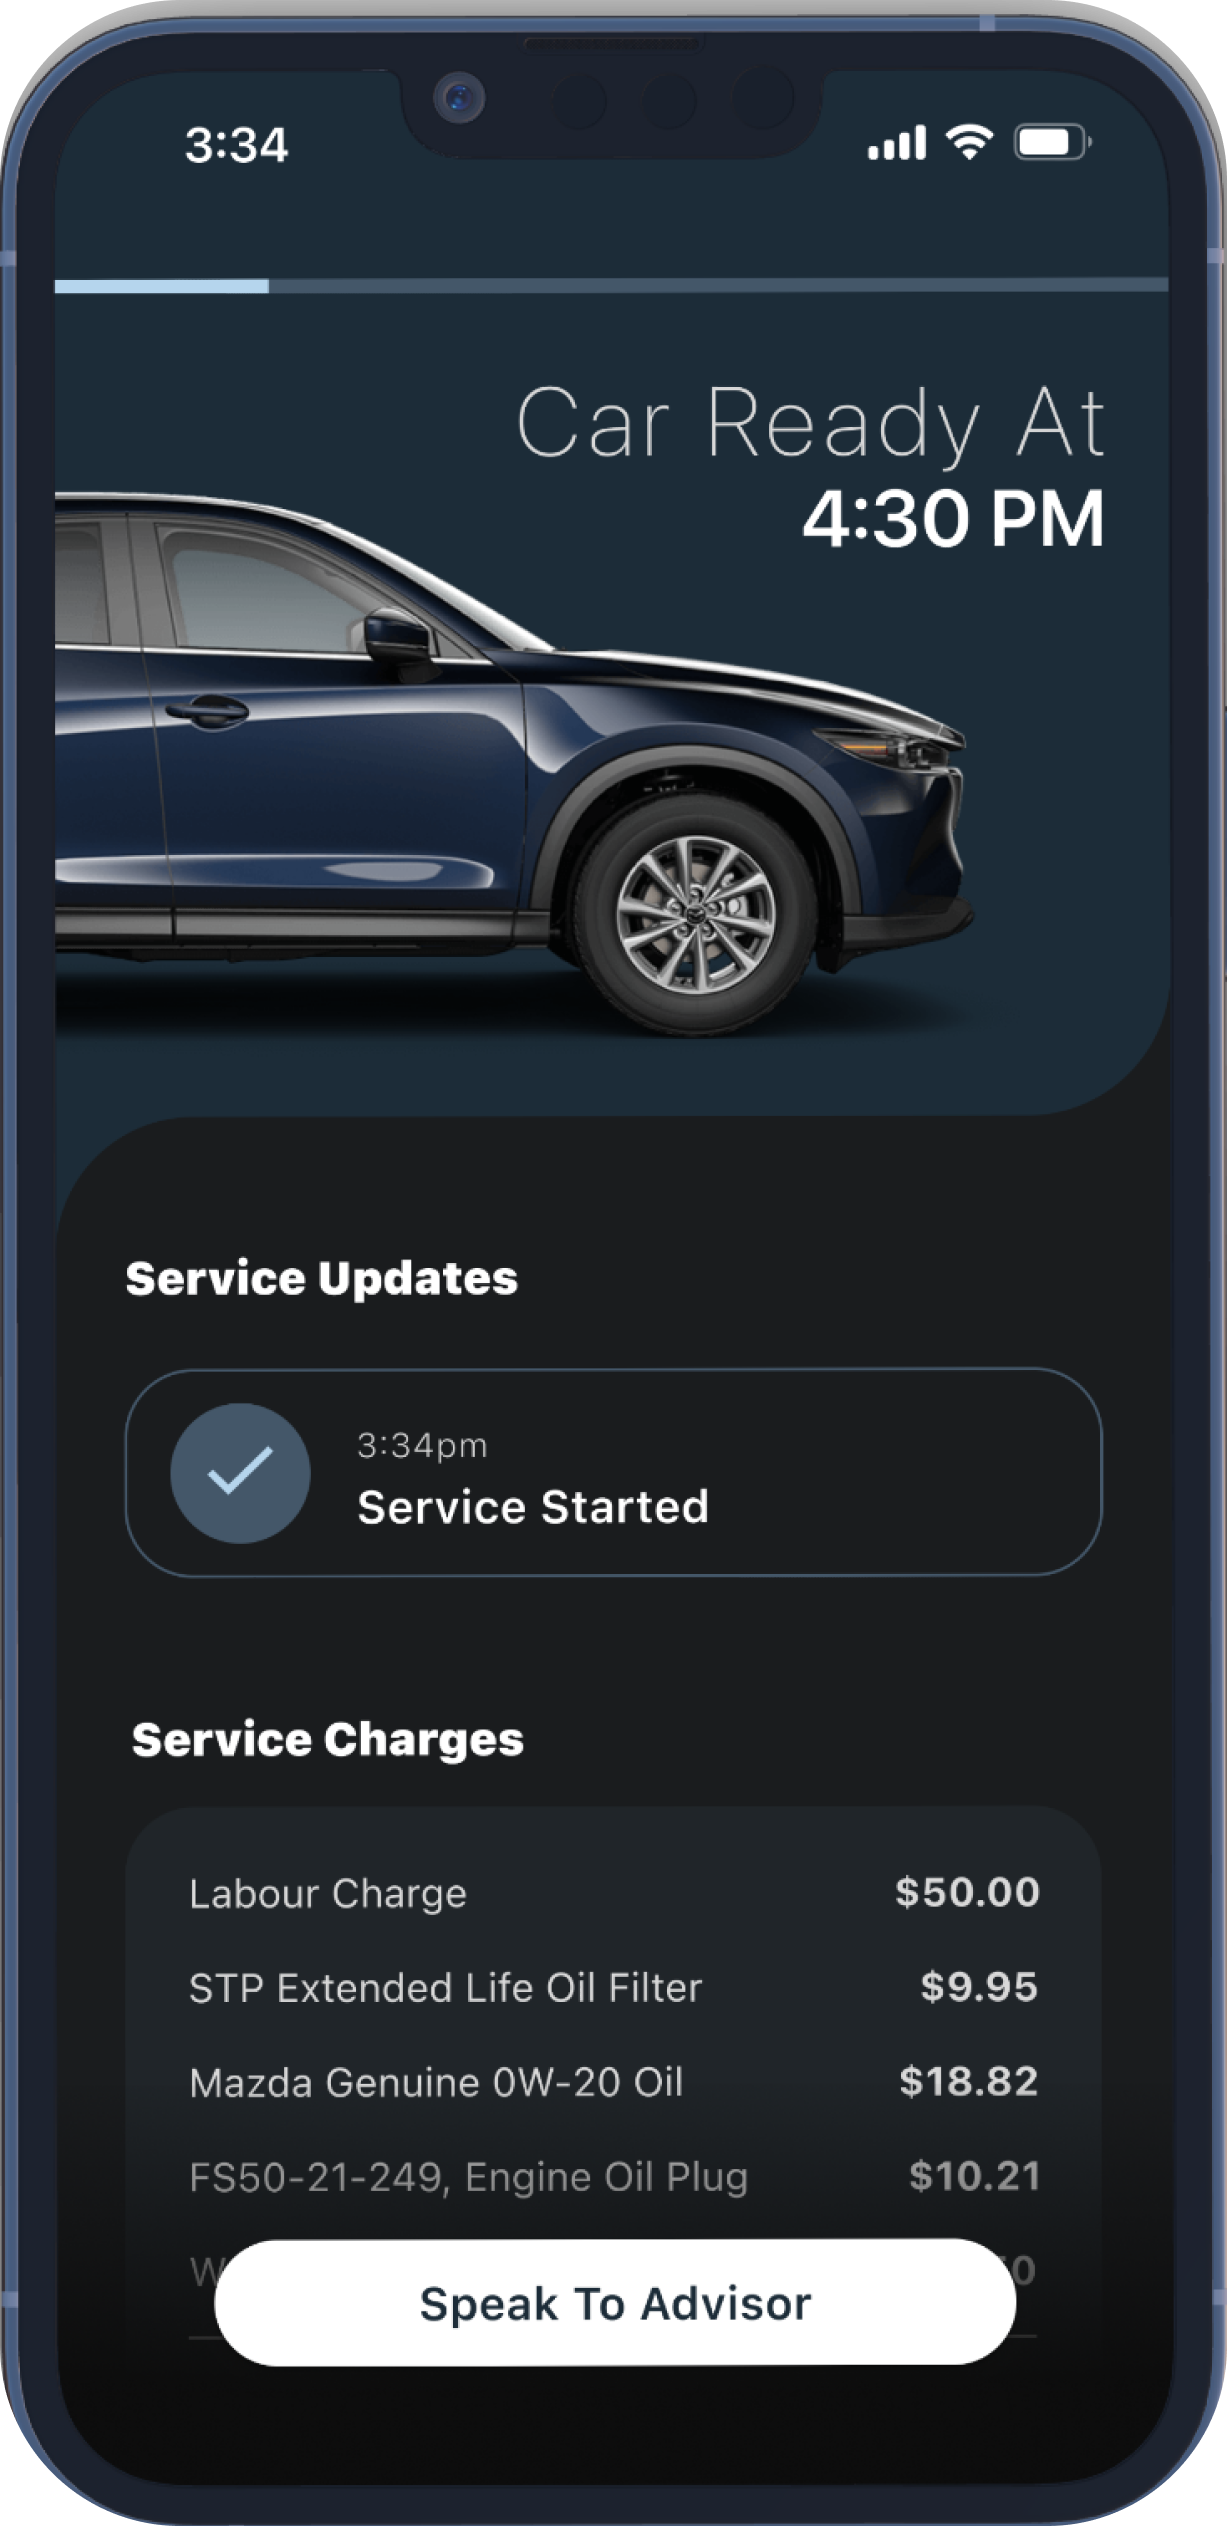 A screenshot of the live service screen with updates throughout your service